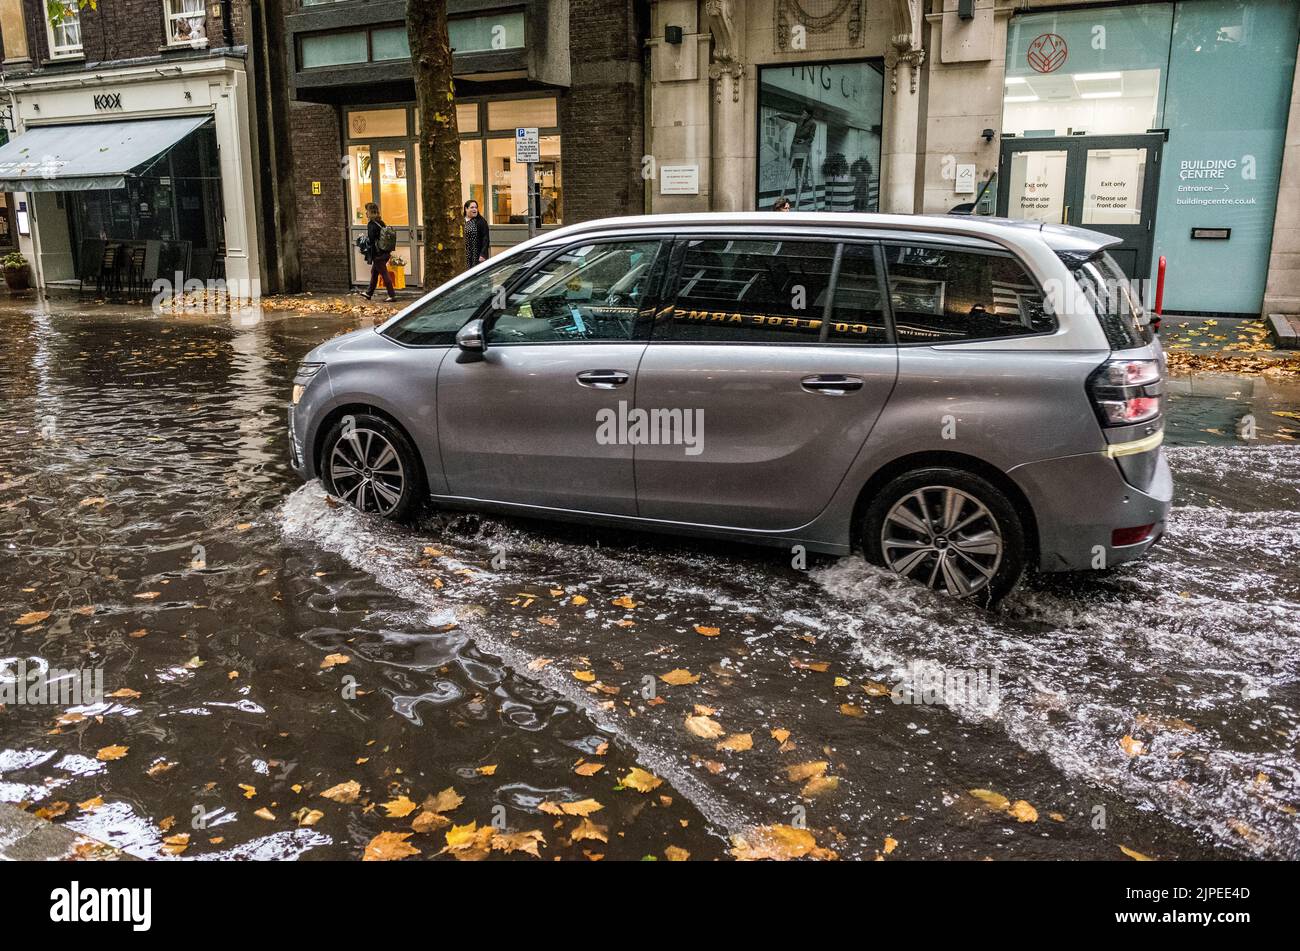 Car drives through flooded Store Street in Central London after terrential rain downpour, England, UK, Climate Change. Stock Photo